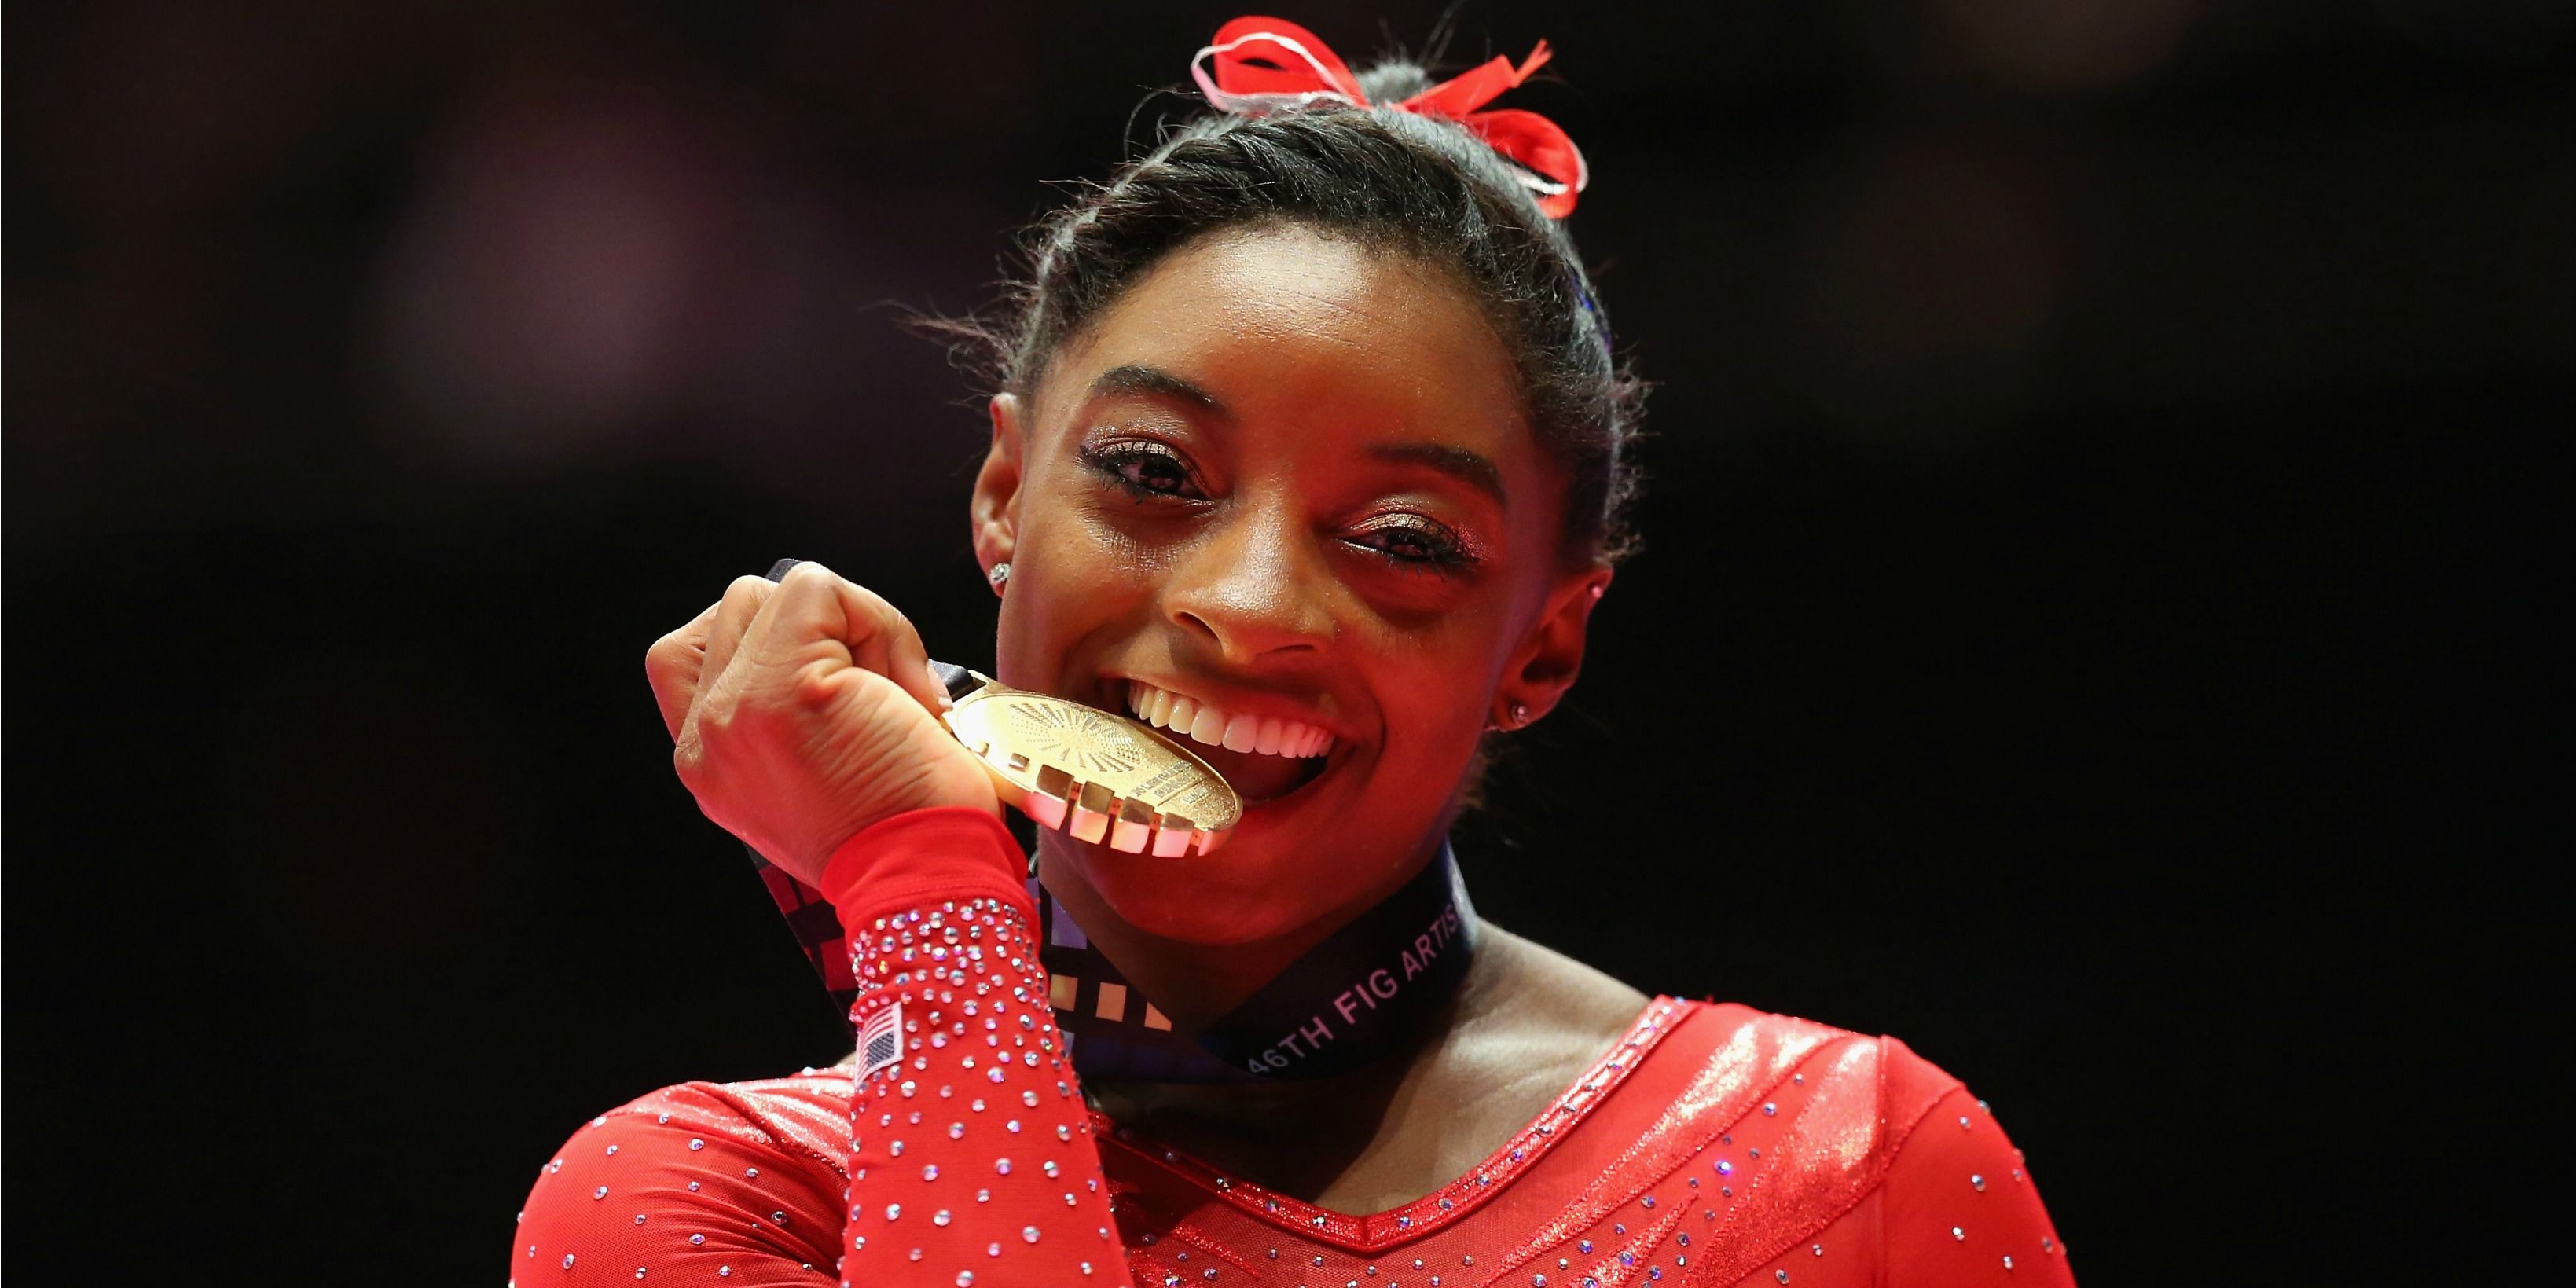 13 Fun Facts About Olympic Gymnast Simone Biles